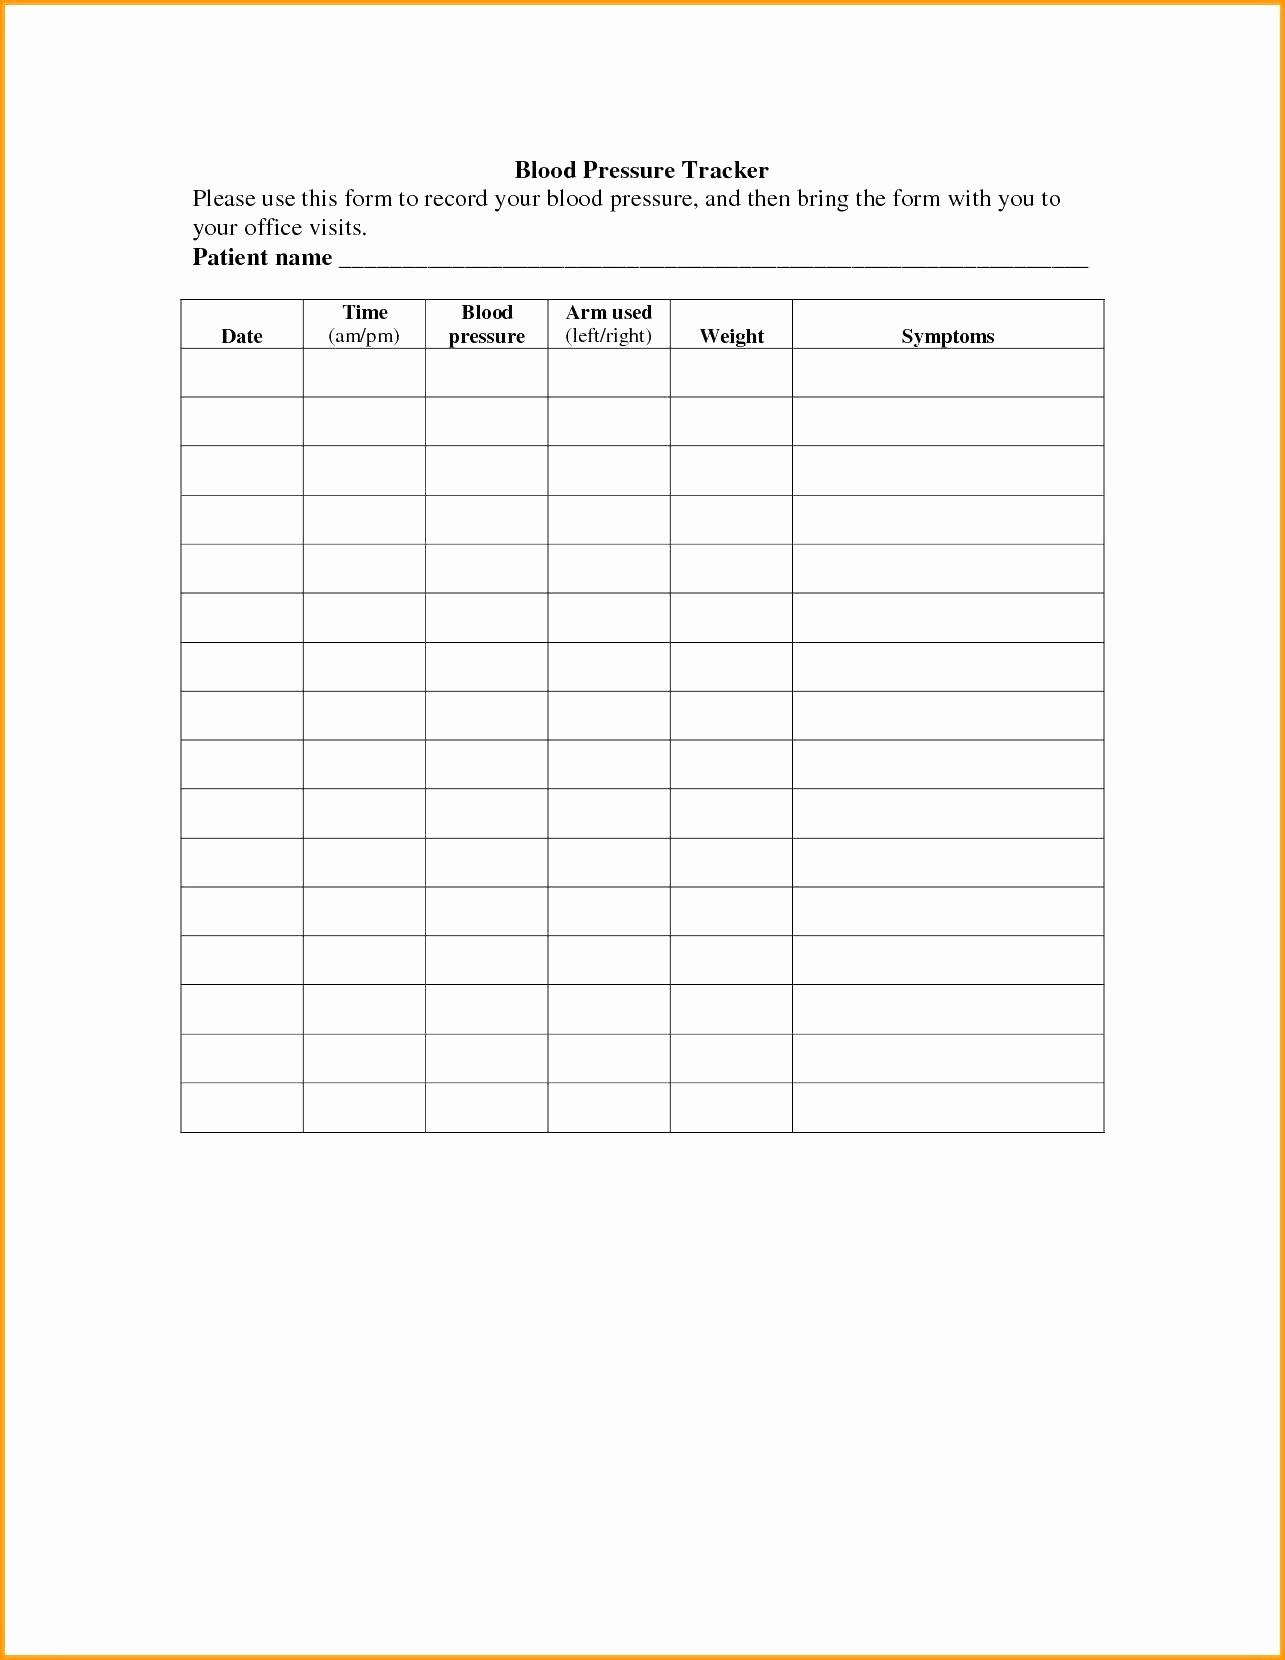 Blood Pressure Spreadsheet Awesome 50 Inspirational Document Worksheets